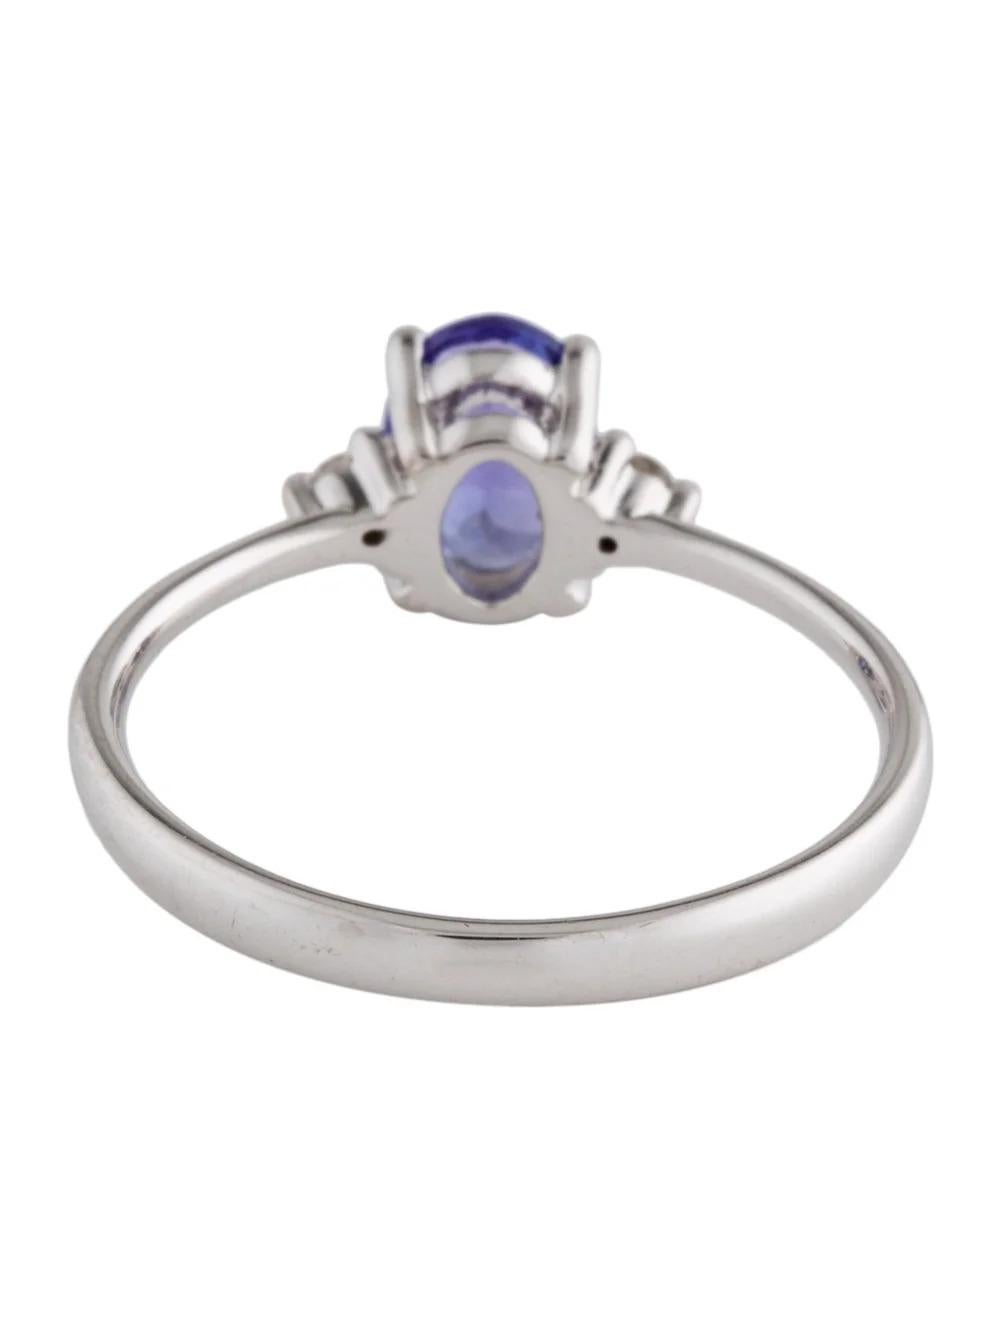 18K Tanzanite & Diamond Cocktail Ring - Size 6.75 - Stunning Design, Timeless In New Condition For Sale In Holtsville, NY